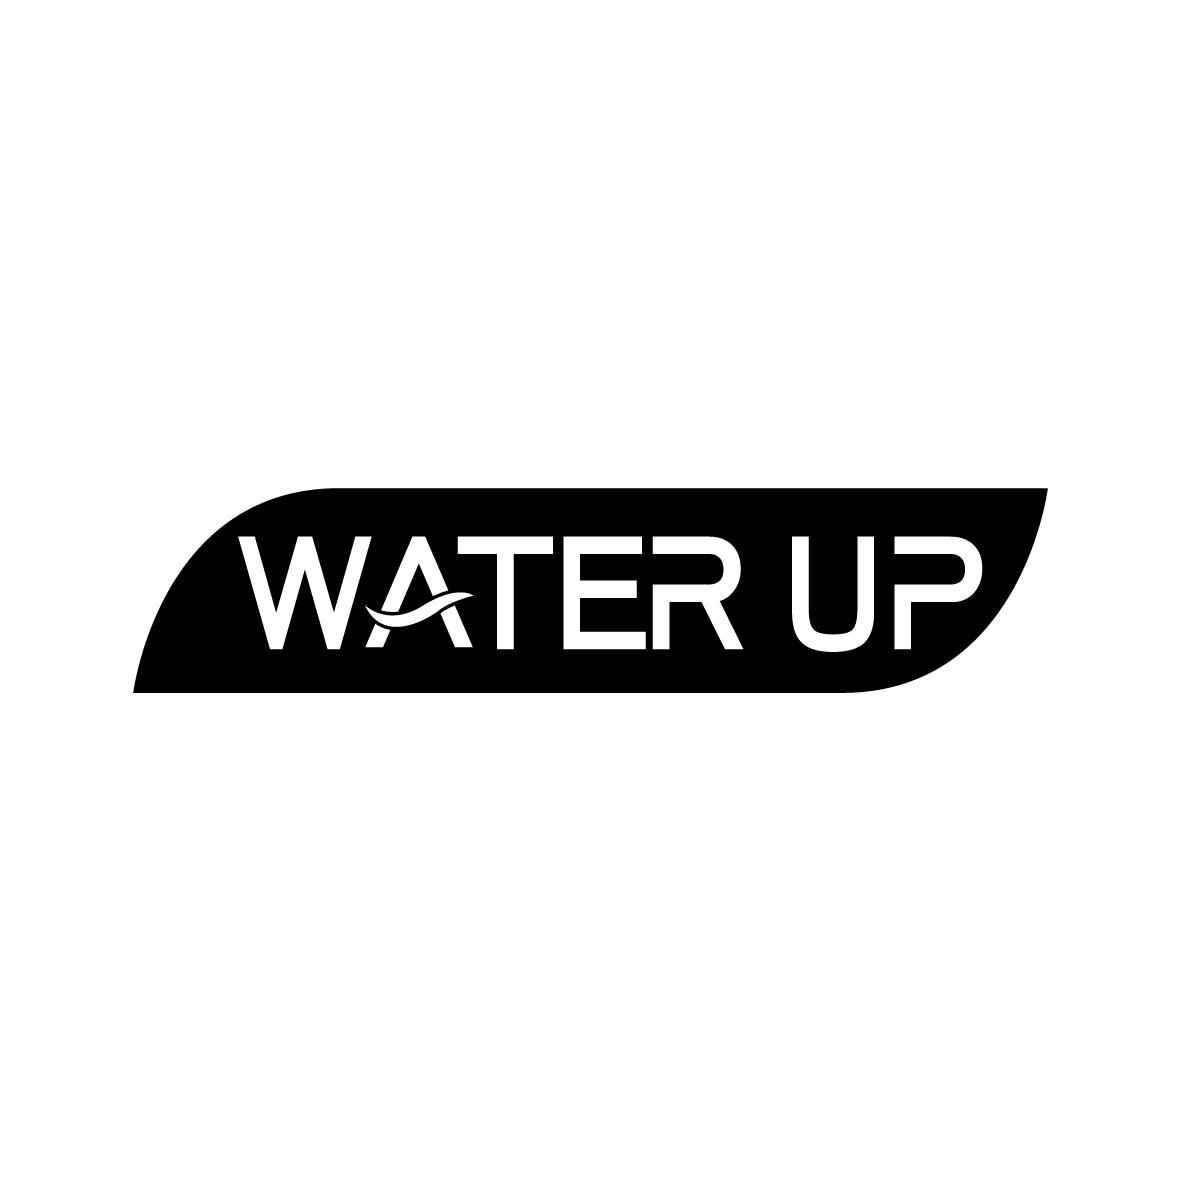 WATER UP